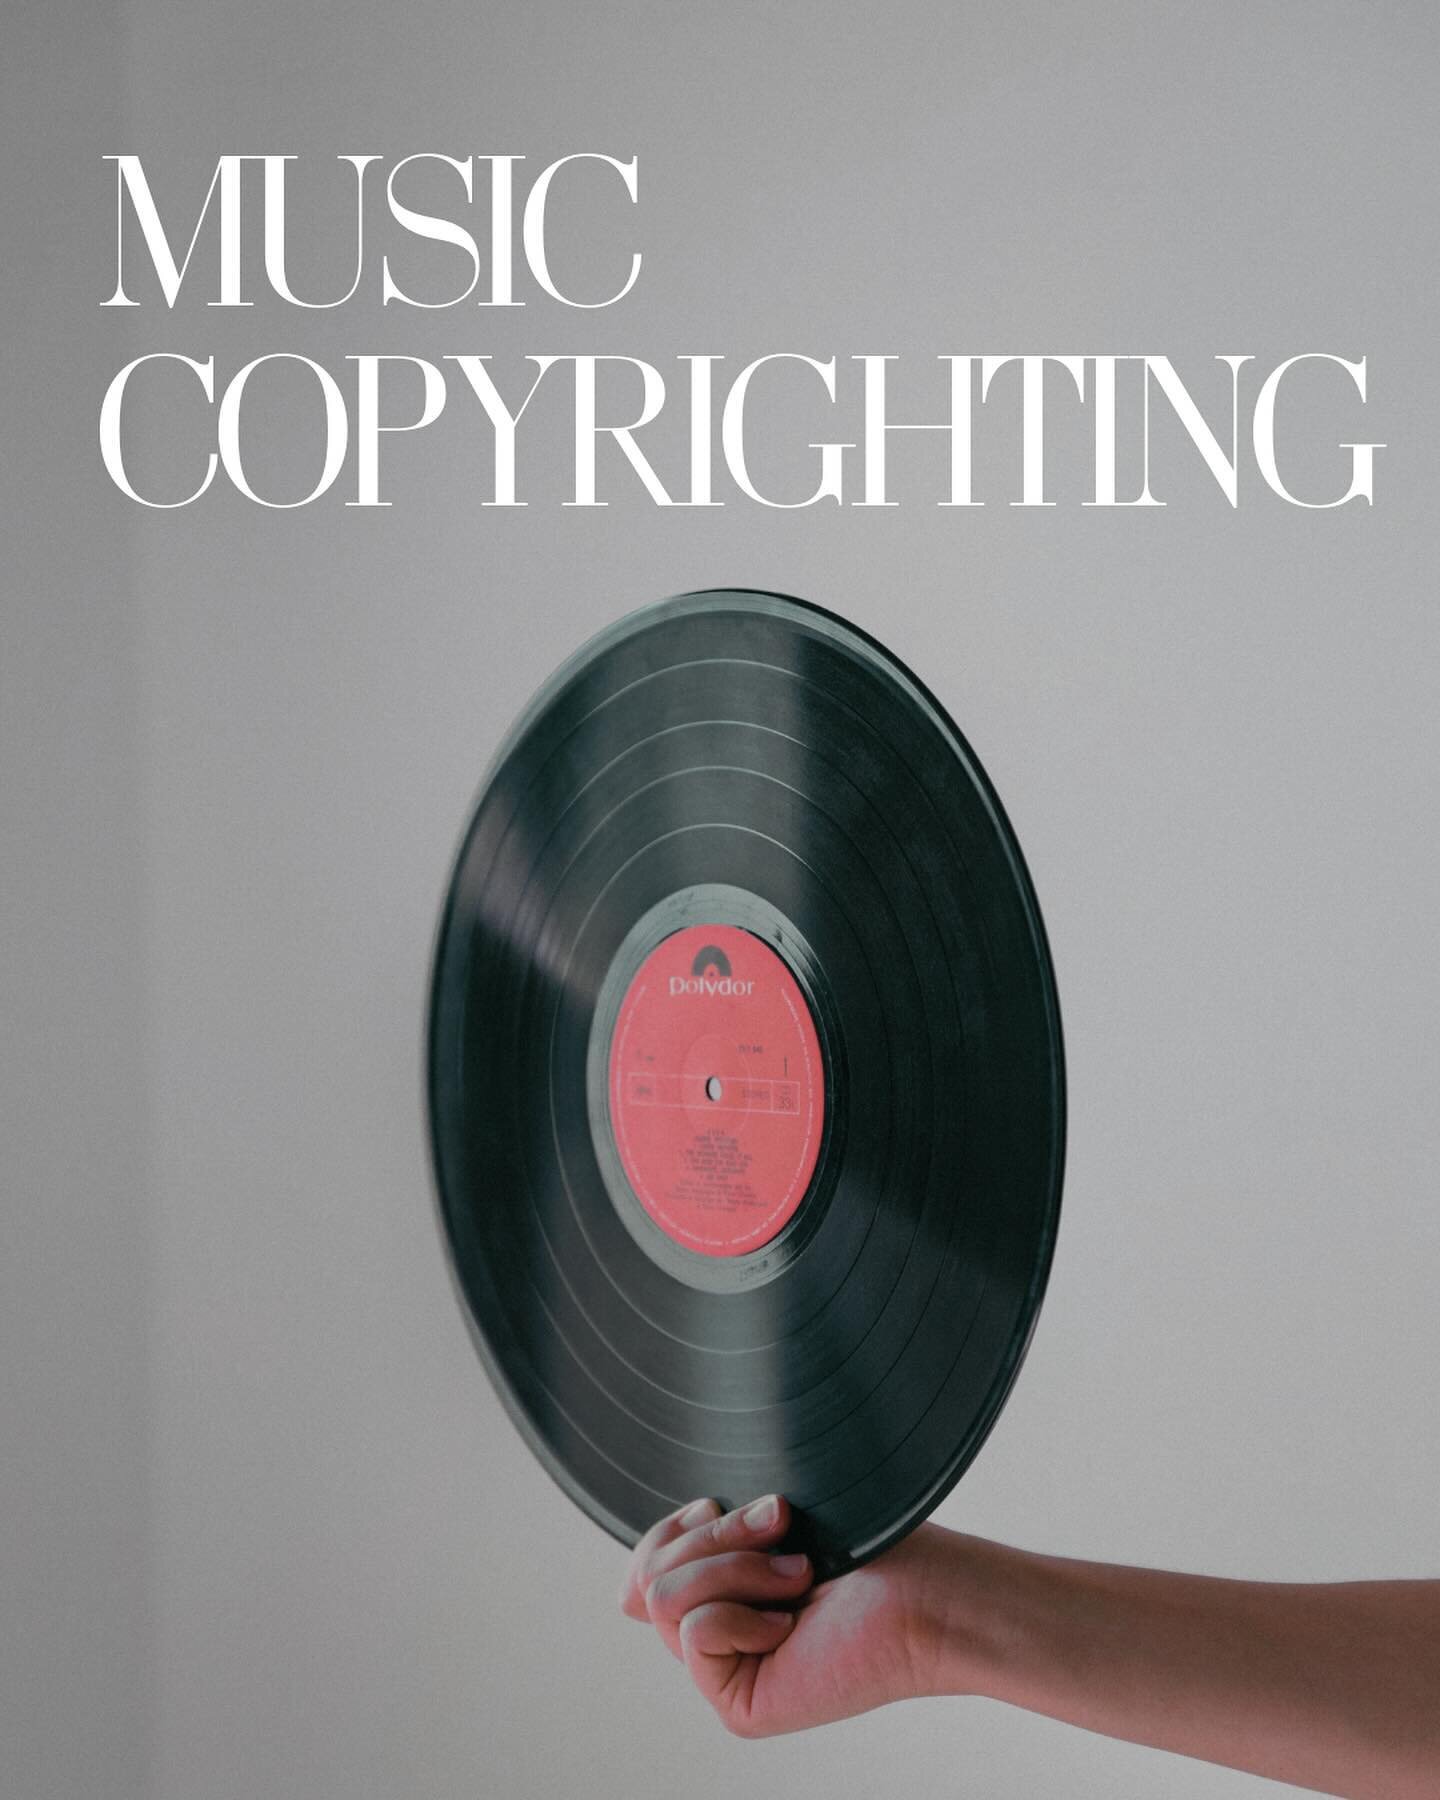 As as an artist, understanding music copyright is essential to protecting your work. Copyrights grant you the authority to produce and sell copies, share those copies, create derivative works inspired by your original composition, and, with certain r